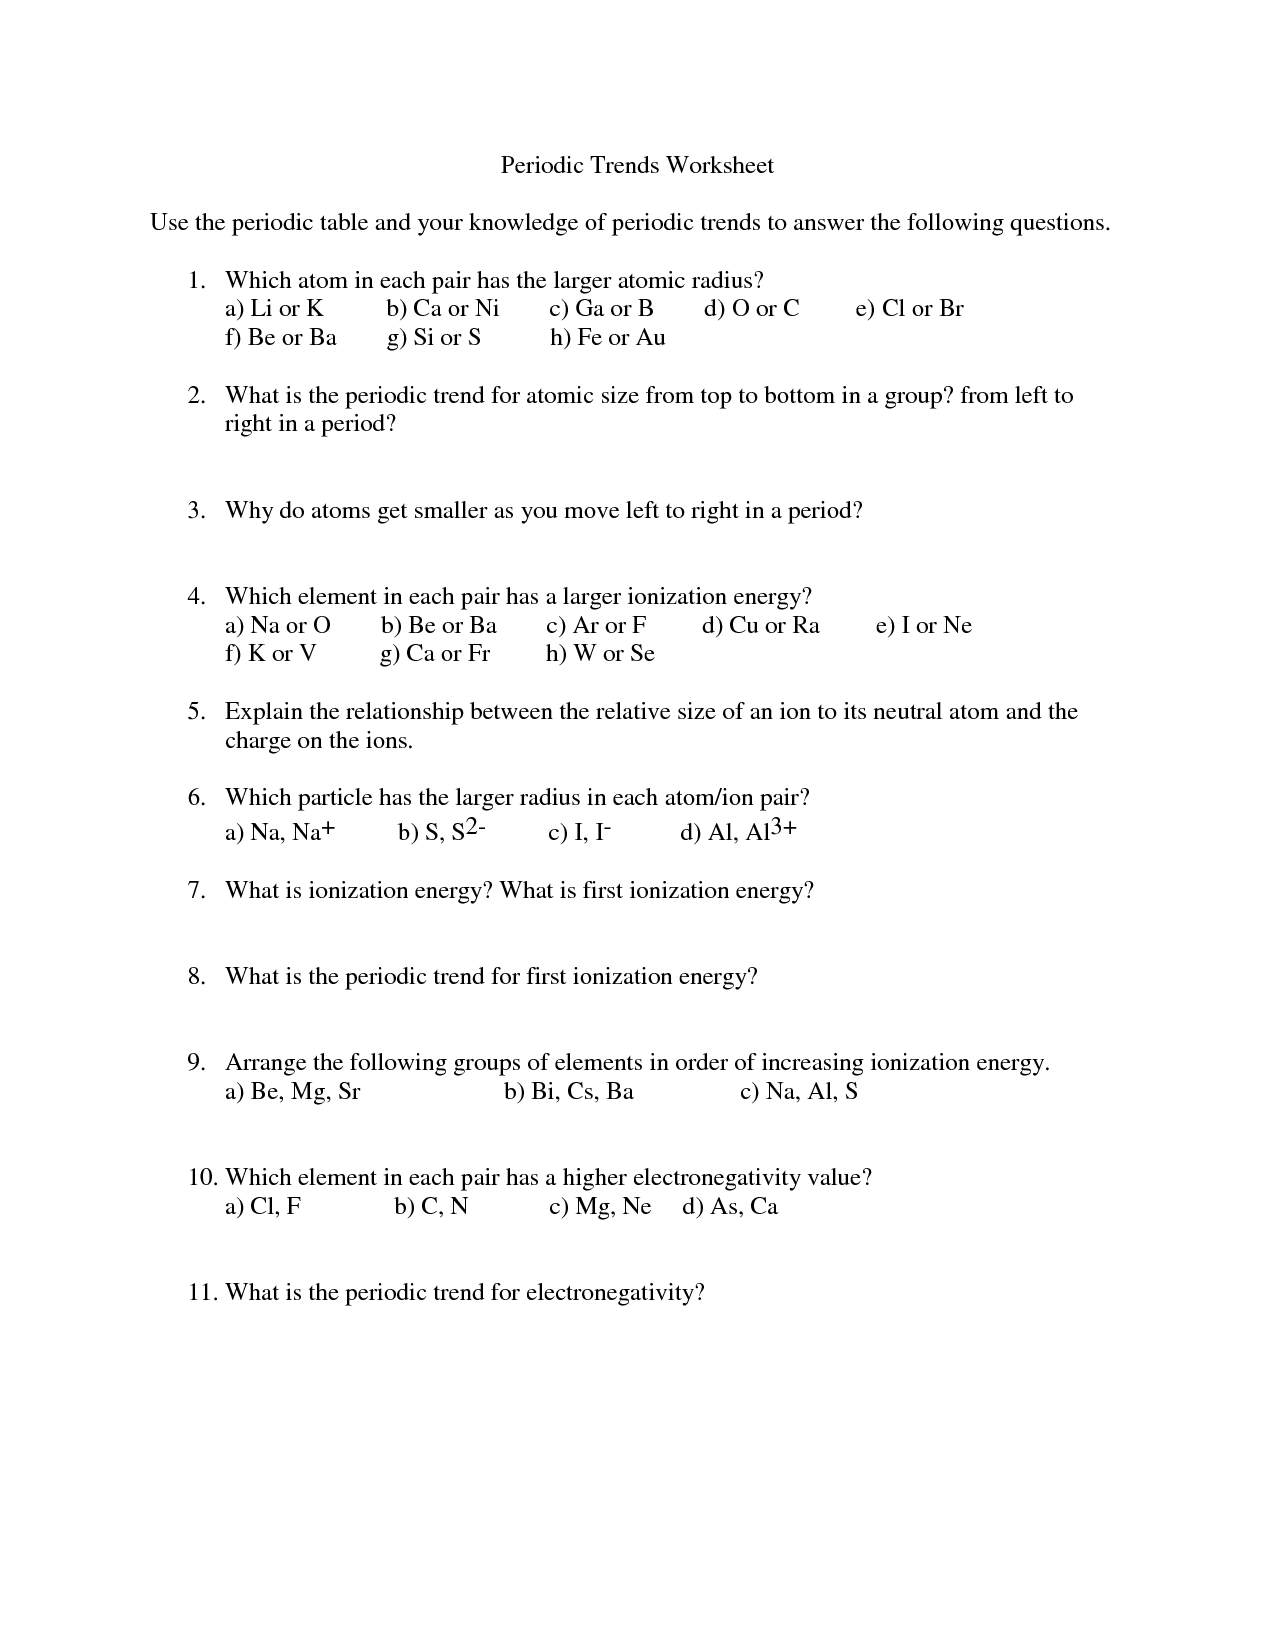 periodic-trends-worksheet-answers-driverlayer-search-engine